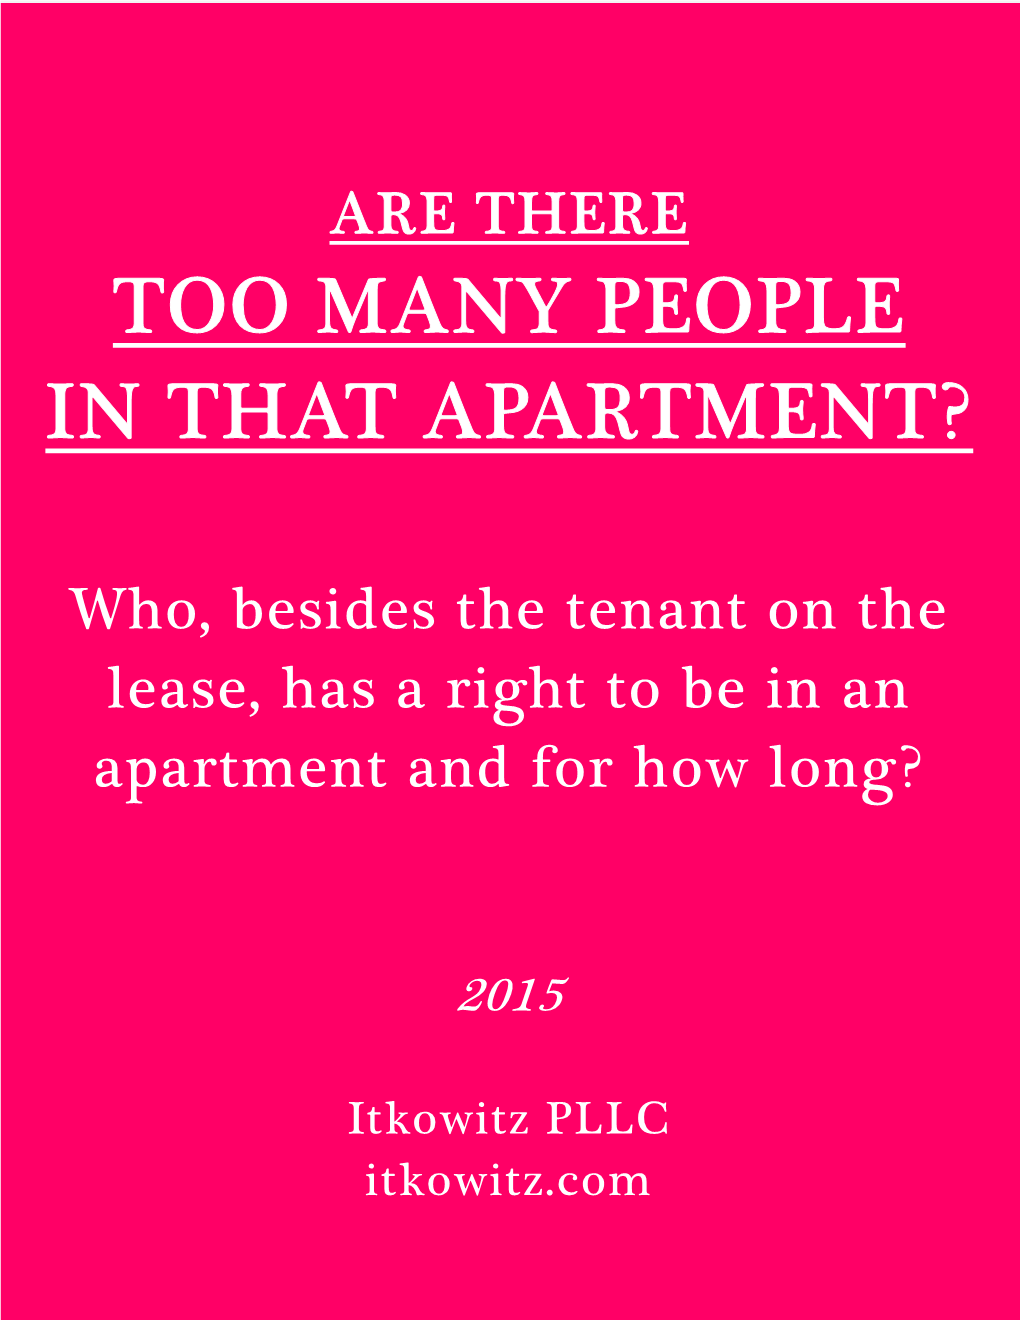 Too Many People in That Apartment?